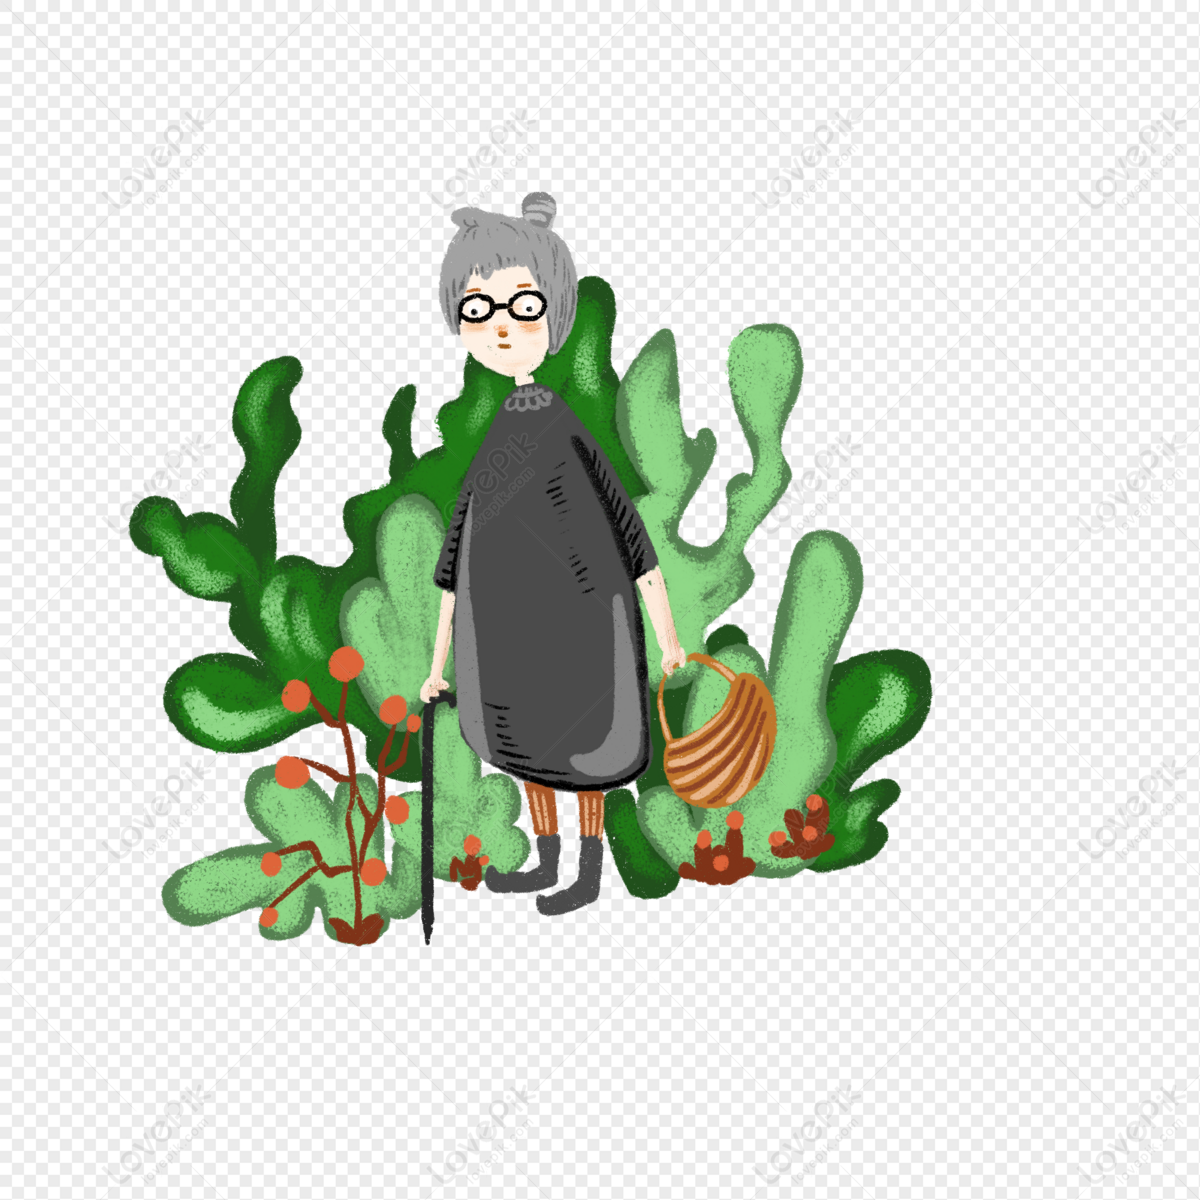 Cartoon Old Lady Illustration With A Walking Stick PNG Image Free Download  And Clipart Image For Free Download - Lovepik | 401349911